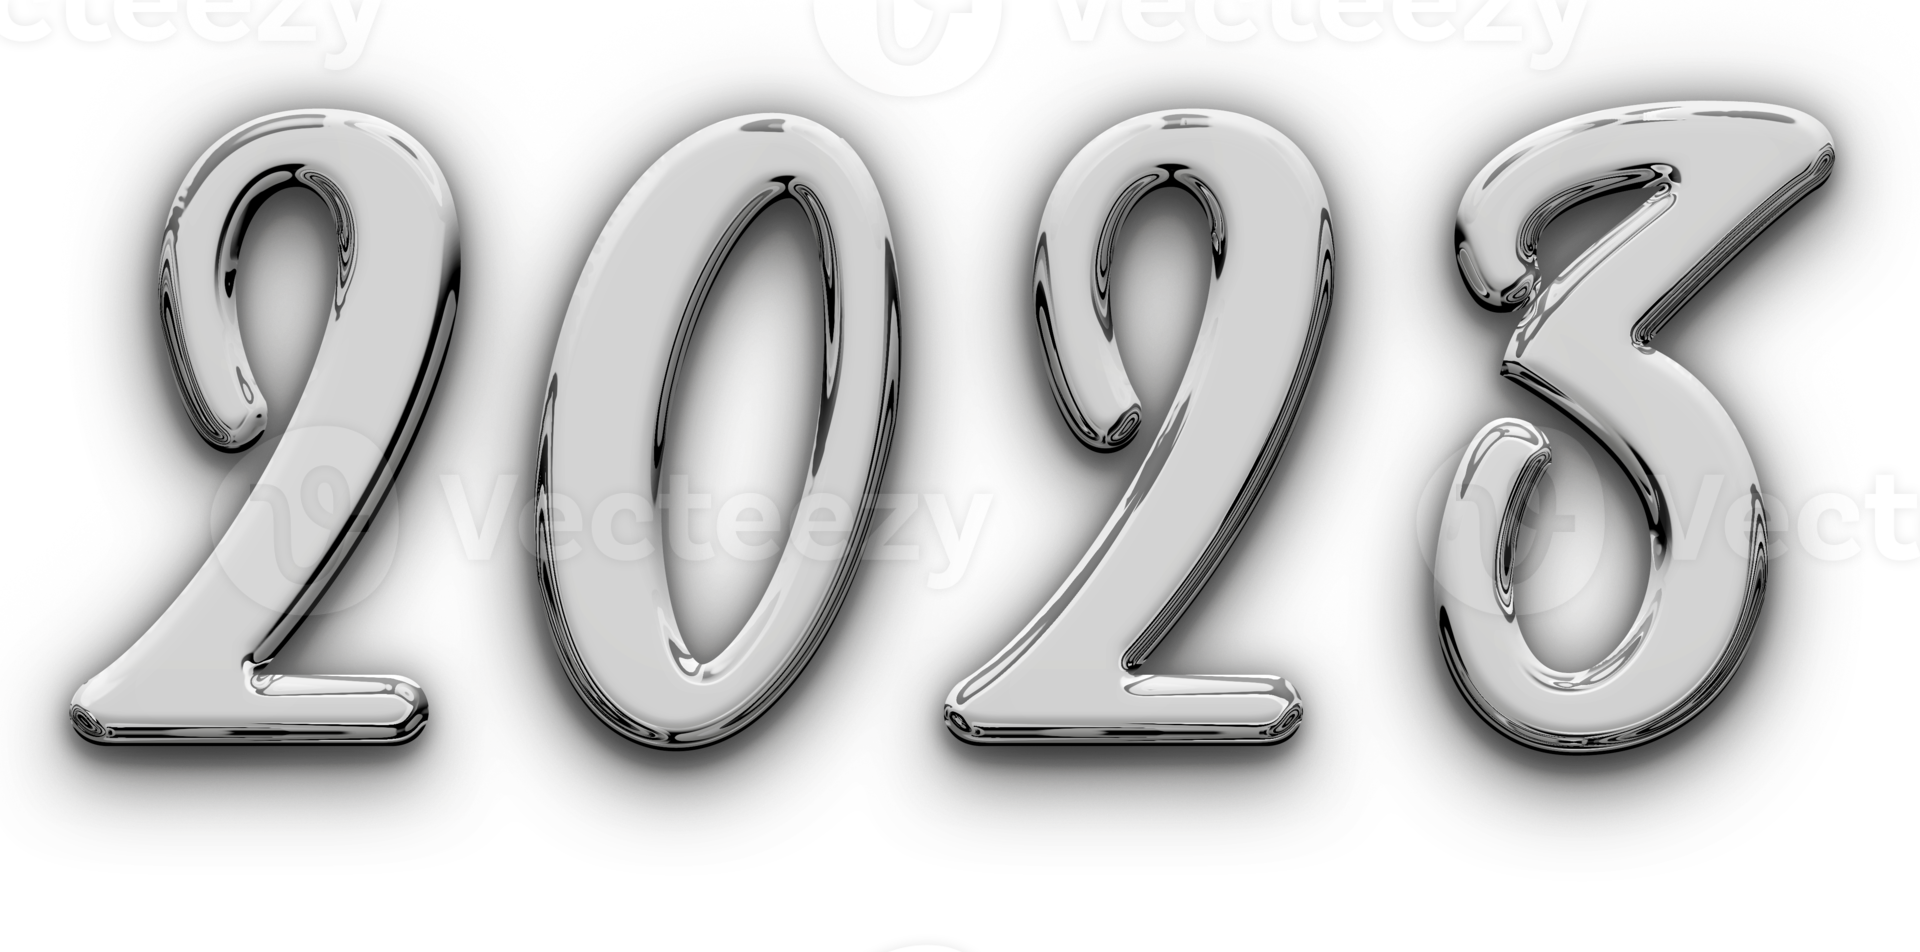 Metallic volumetric 3D Text of the inscription 2023 isolated cut out png